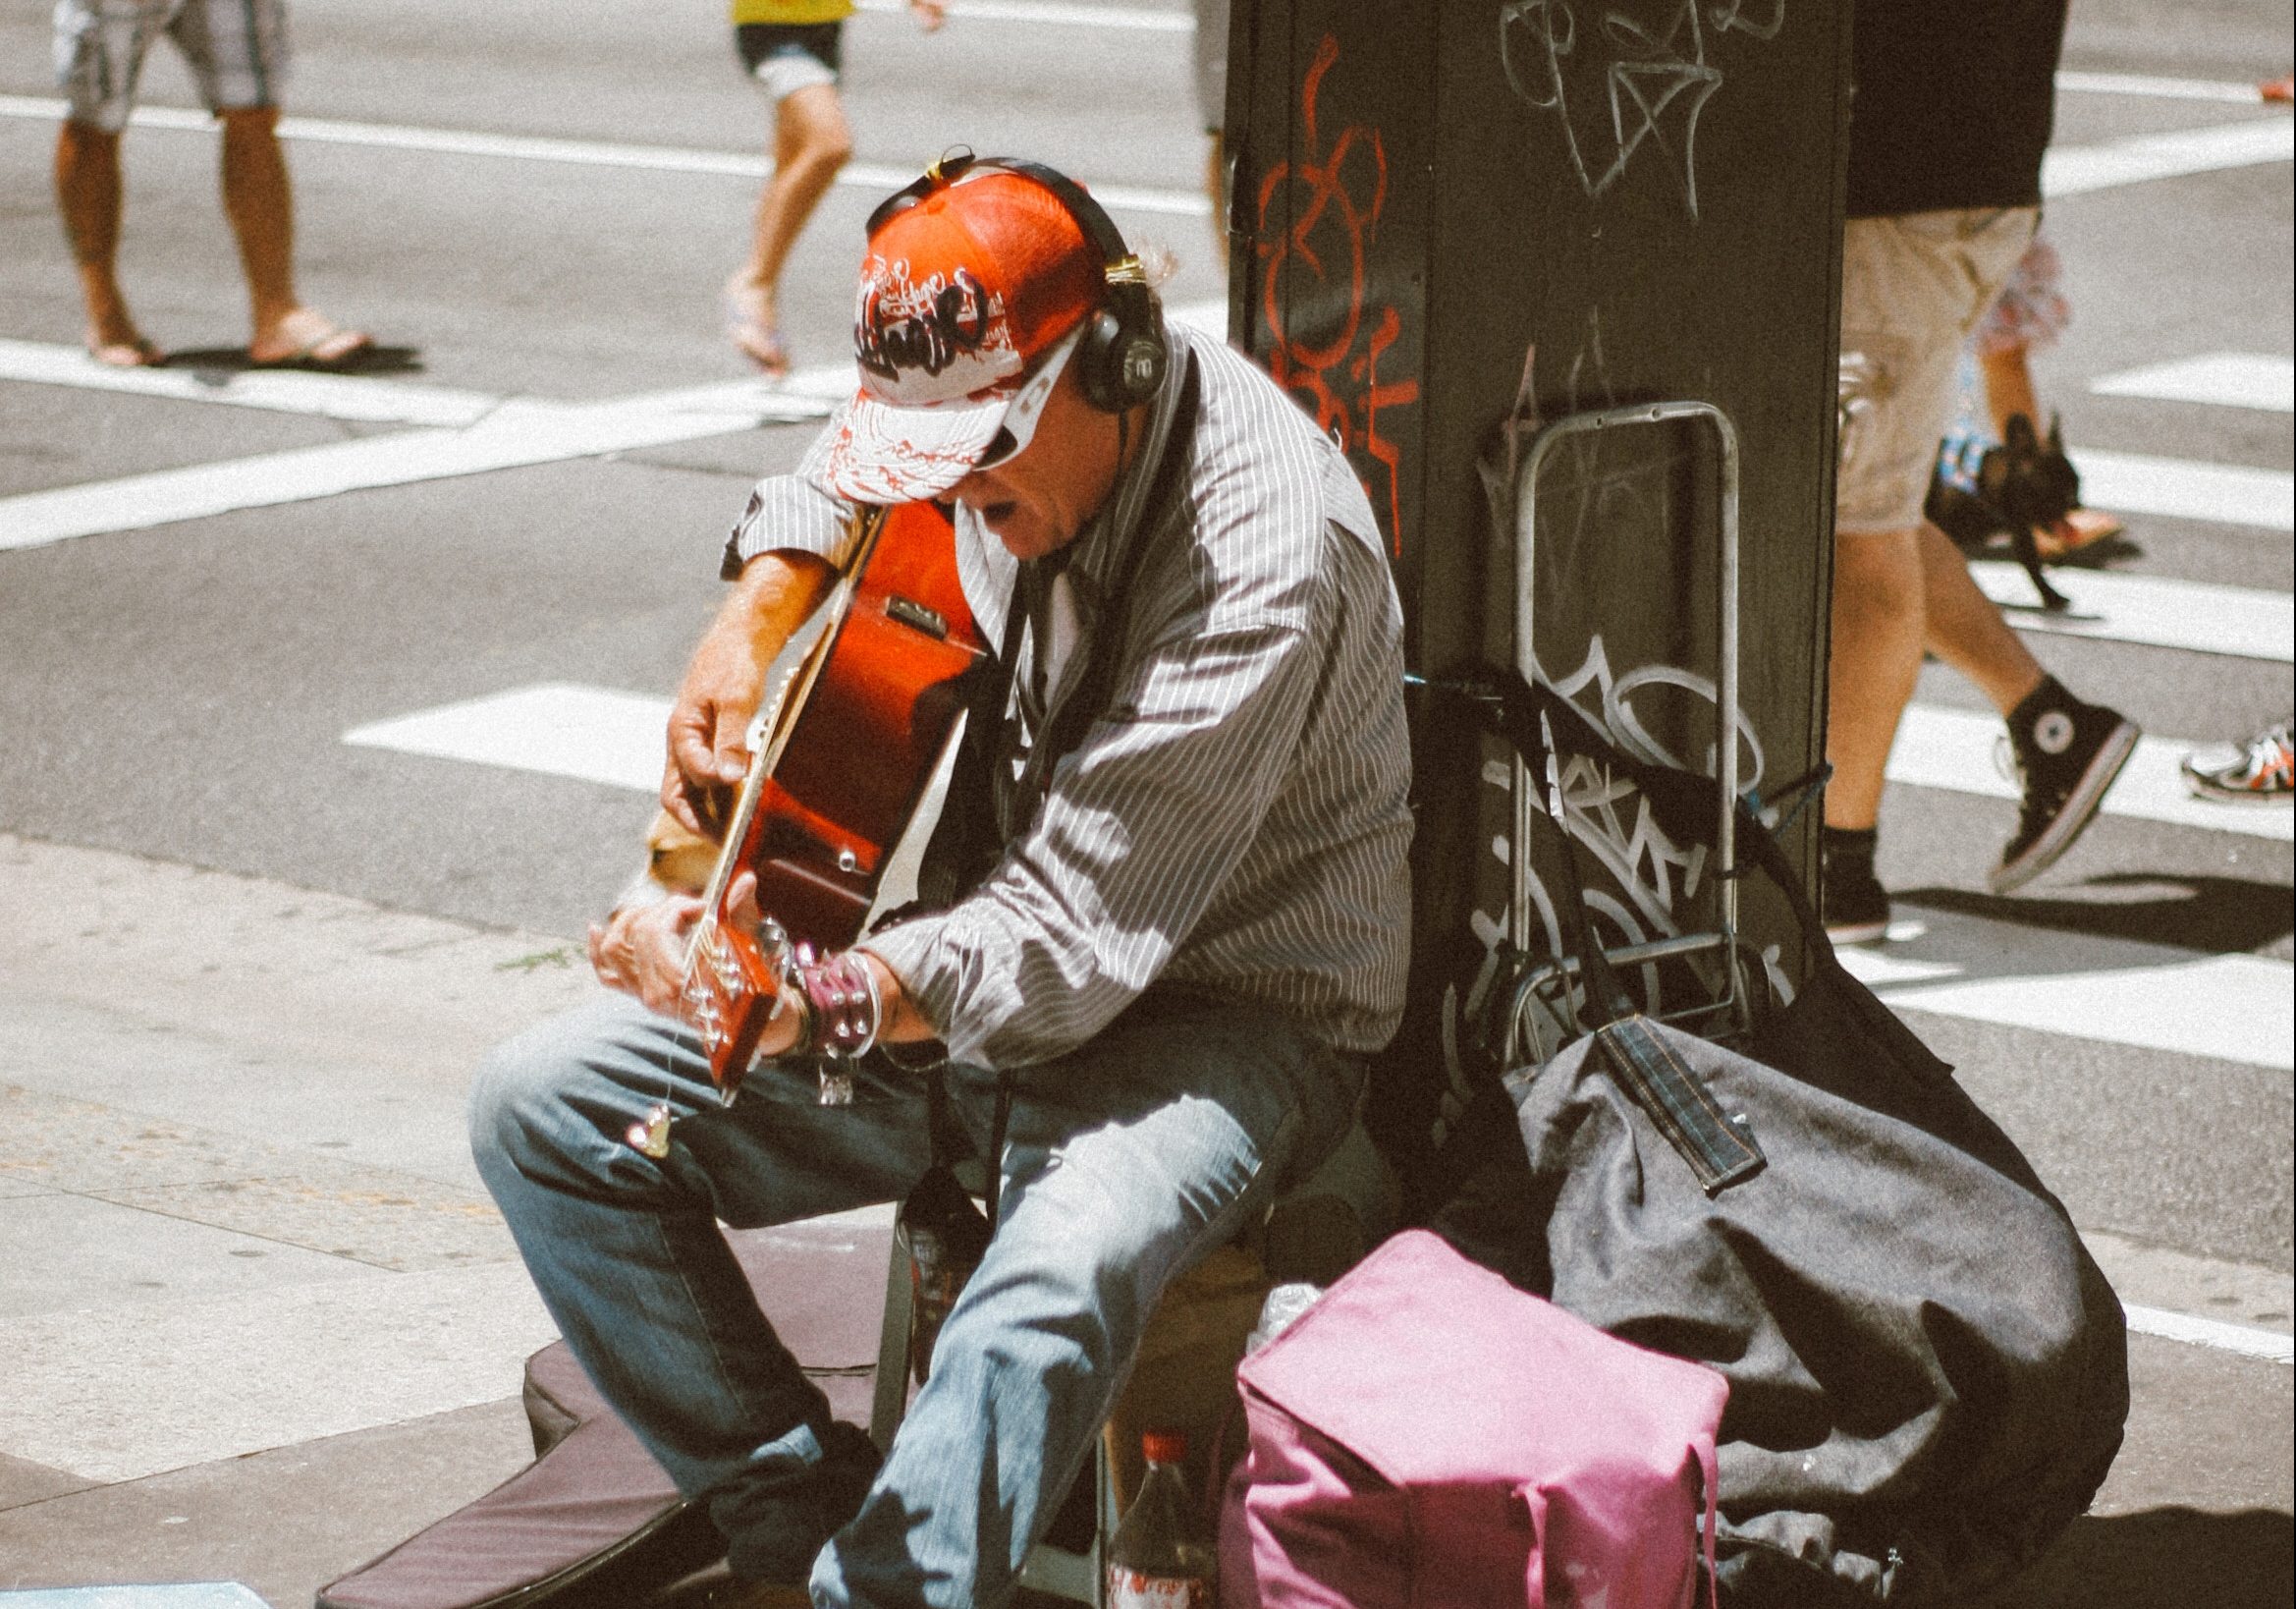 City of Sydney calls for feedback on new busking rules